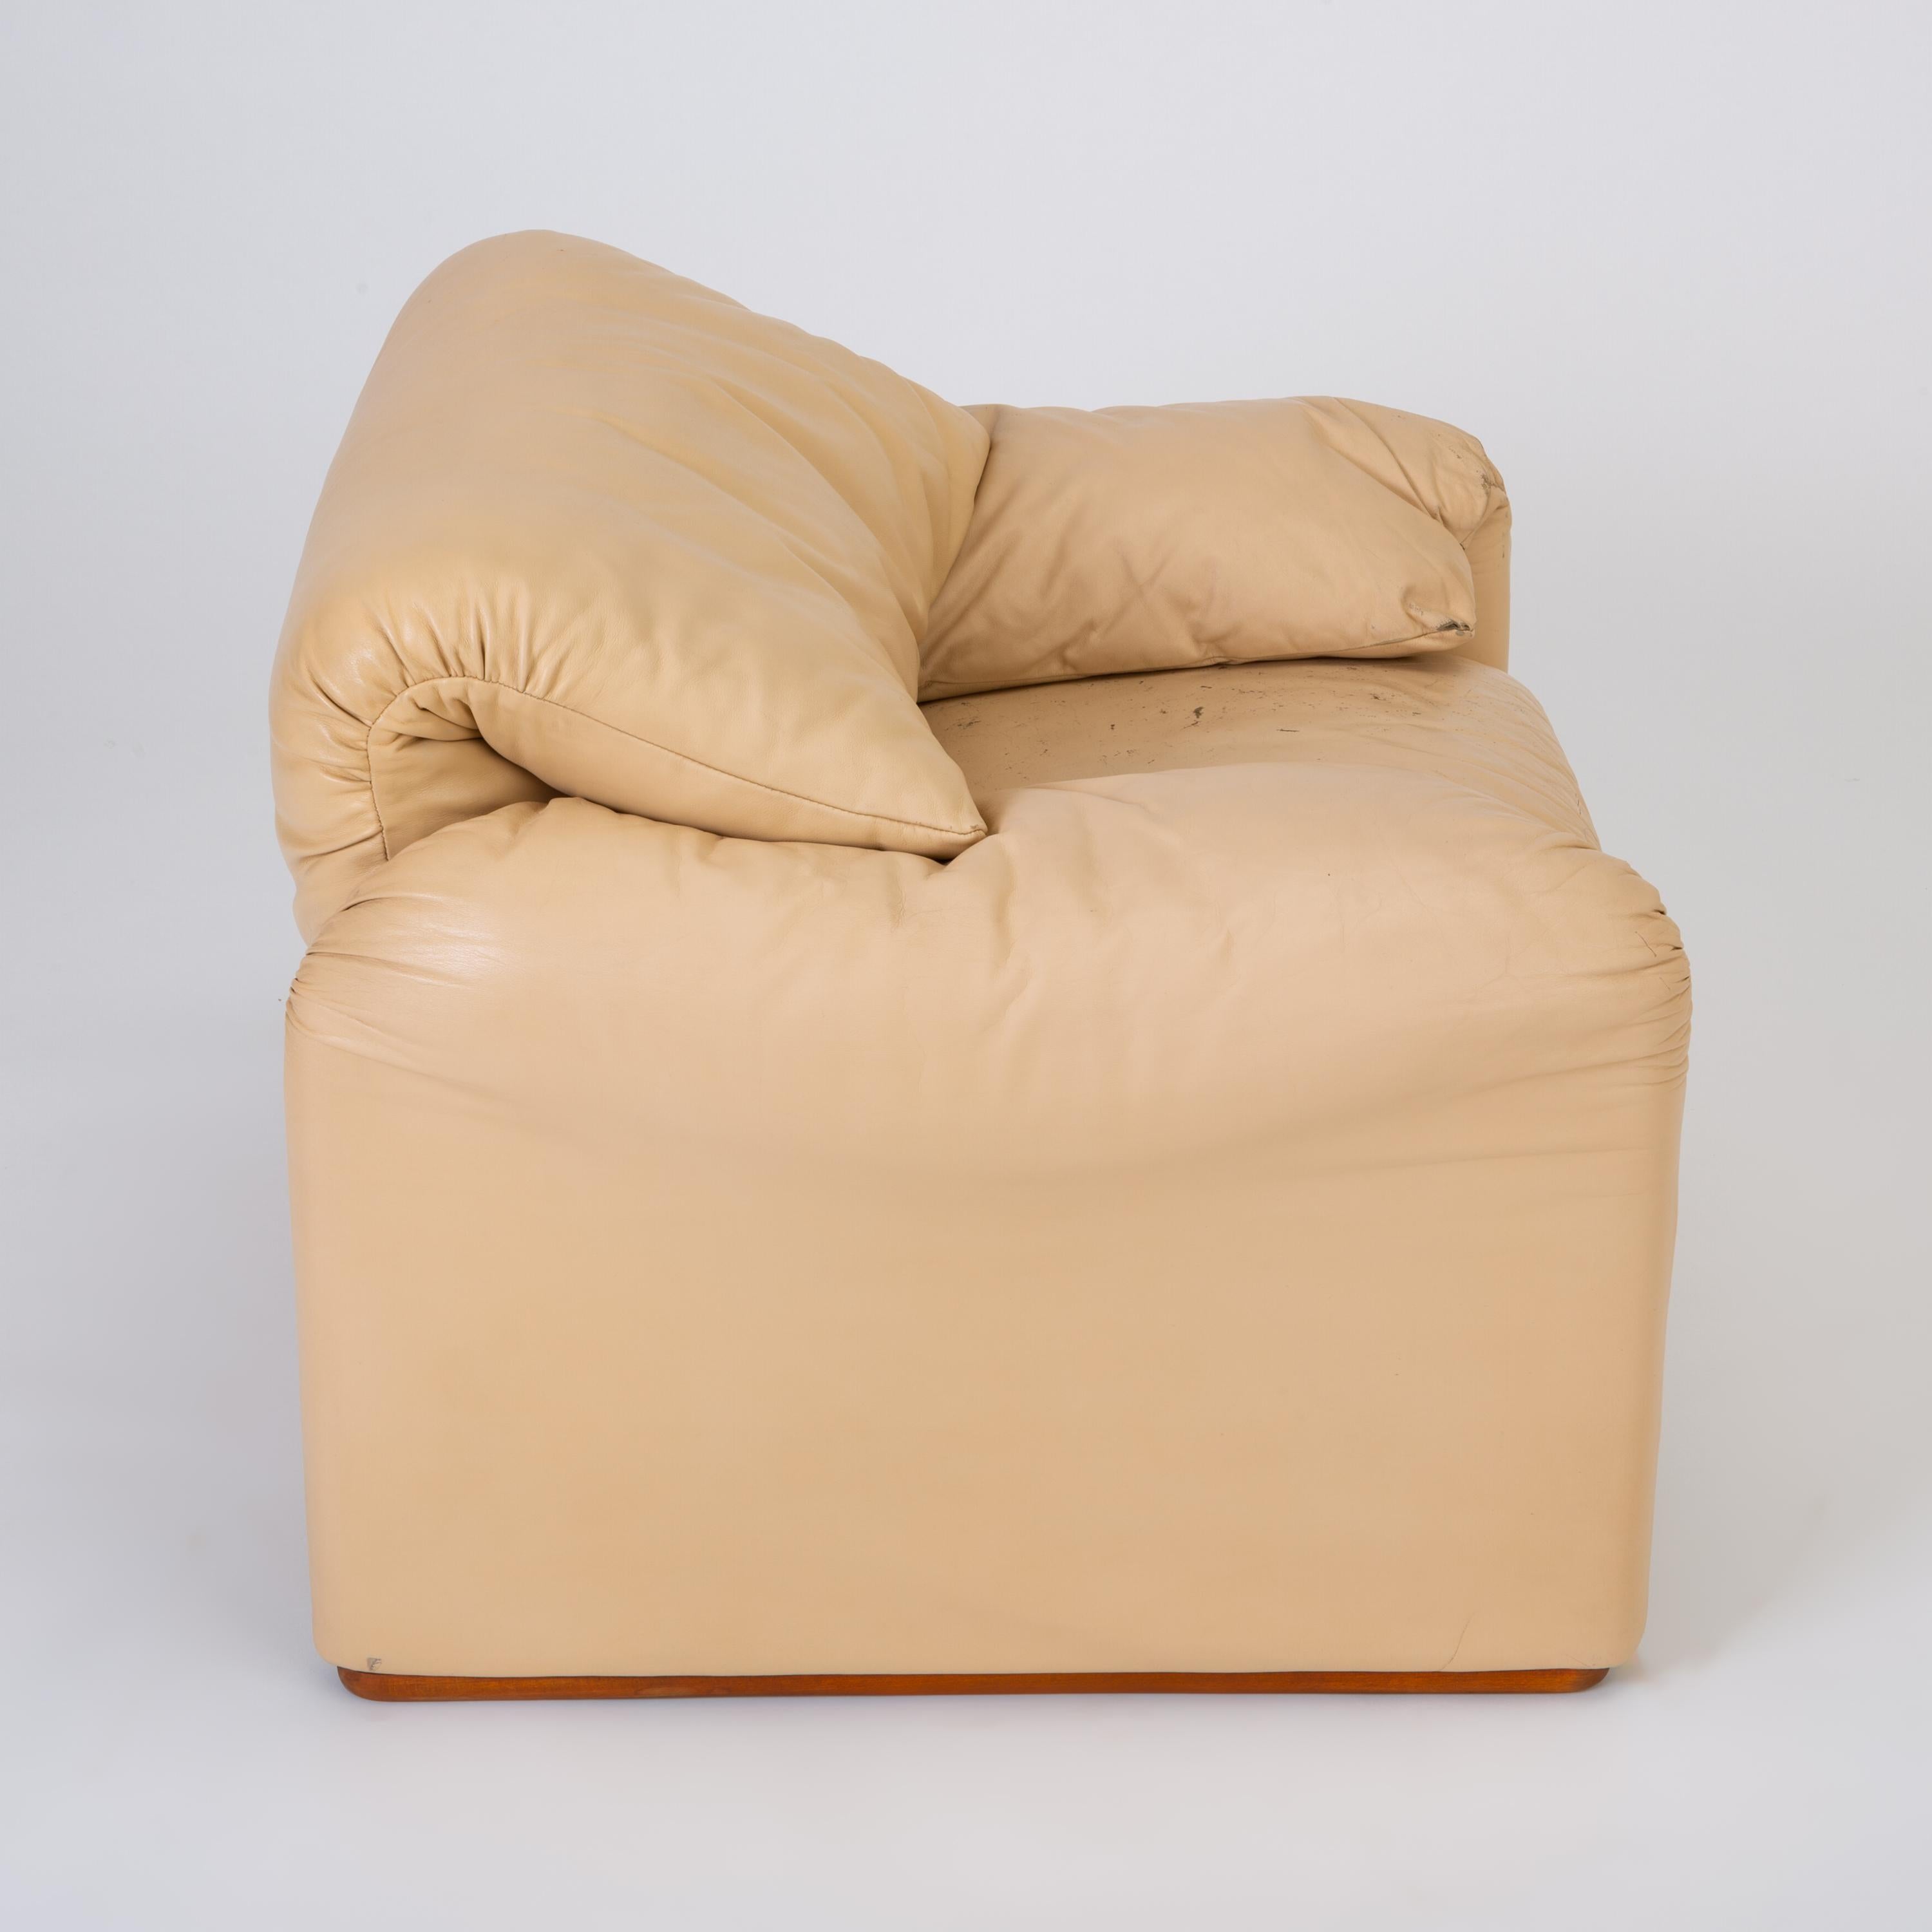 Leather “Maralunga” Chair by Vico Magistretti for Cassina 7